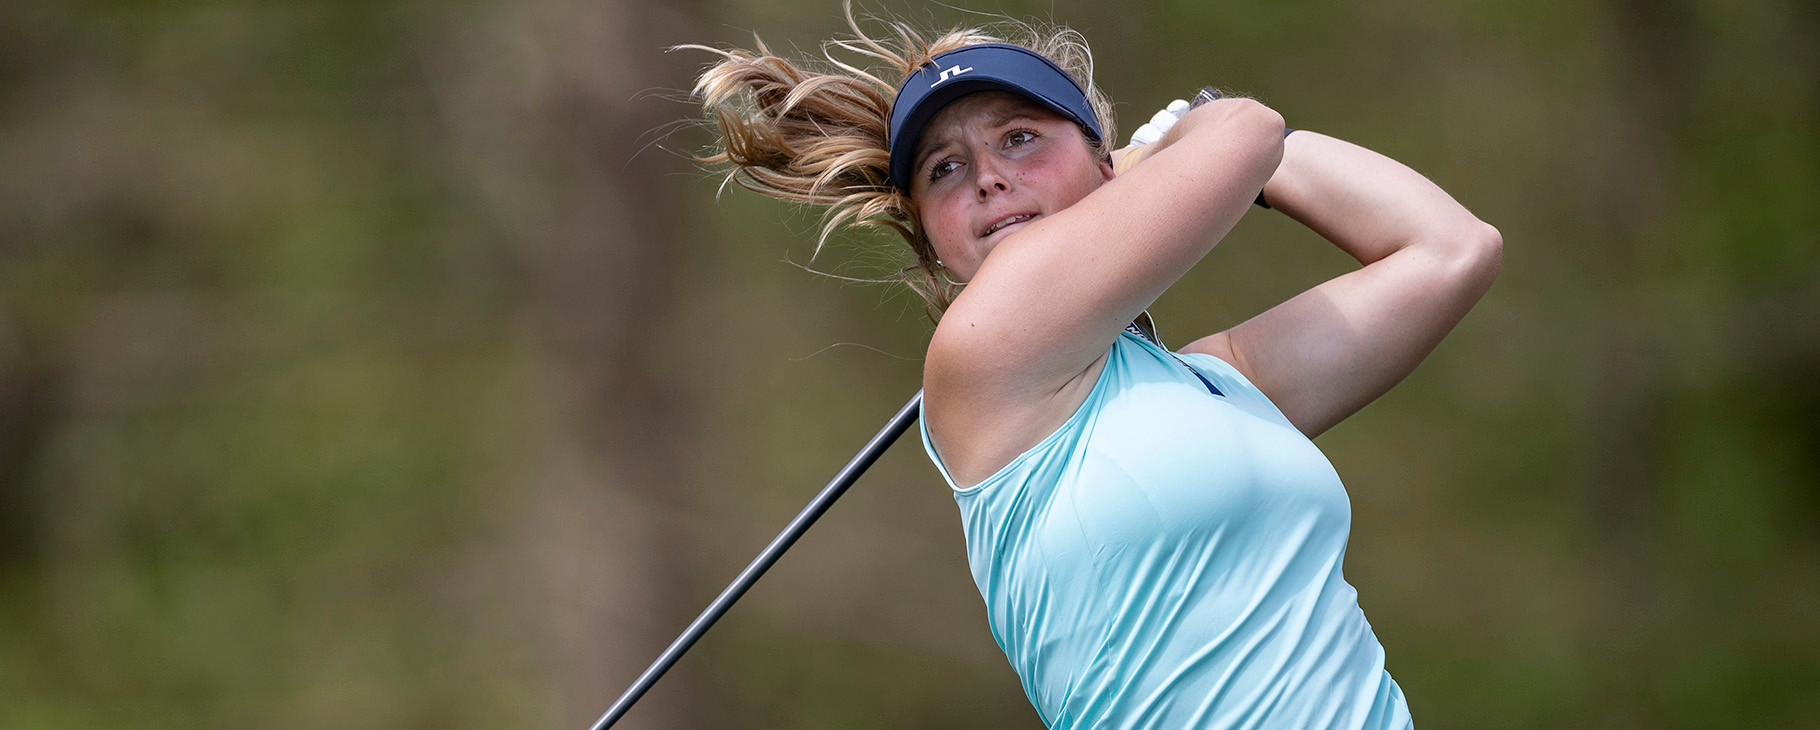 Arwefjäll To Compete at Augusta National Women's Amateur